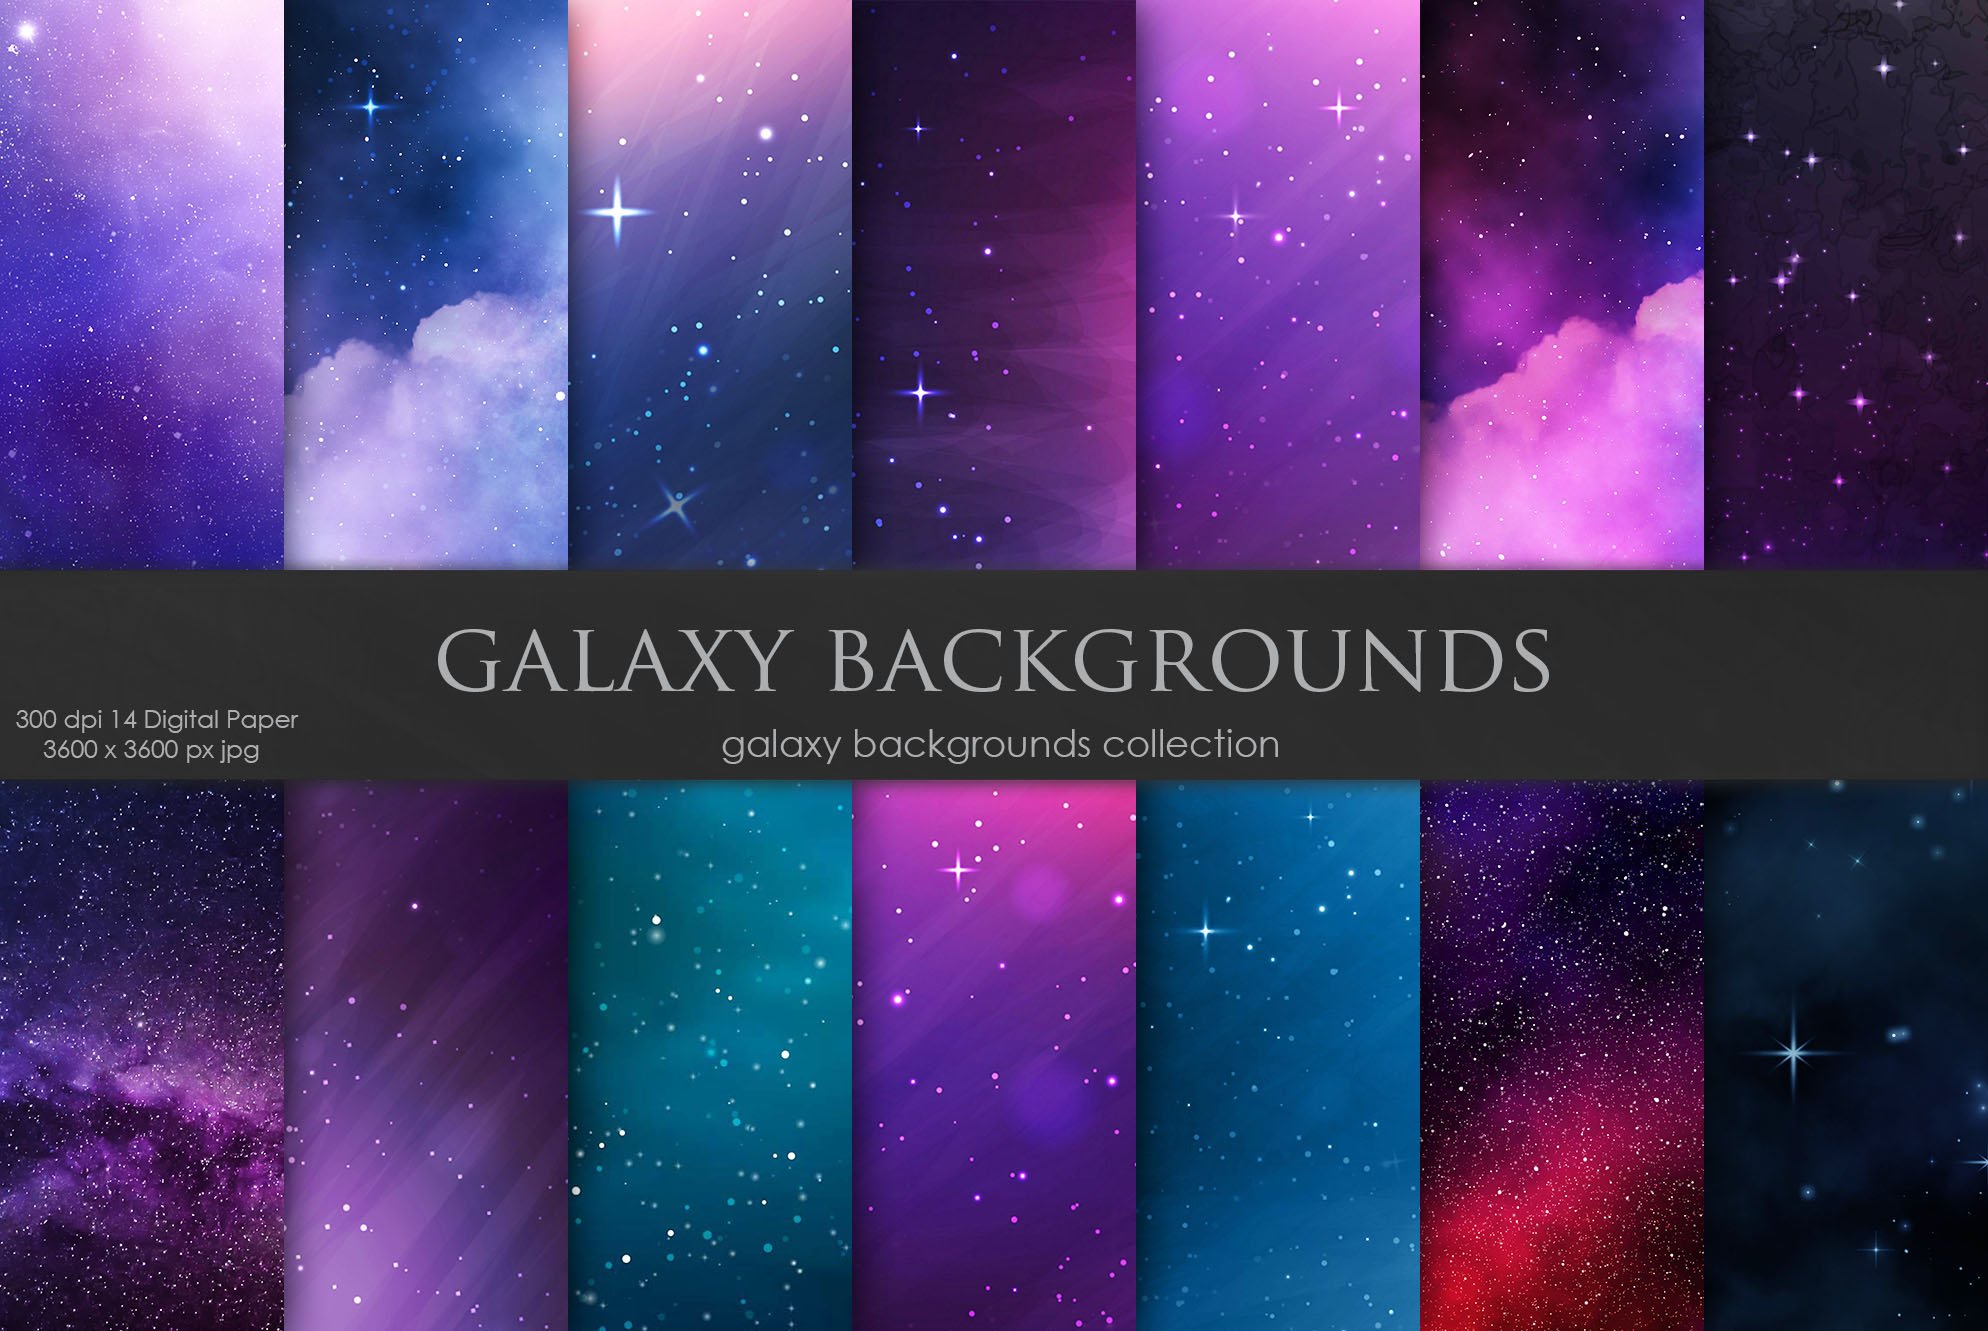 Galaxy, Sky, Space Backgrounds cover image.